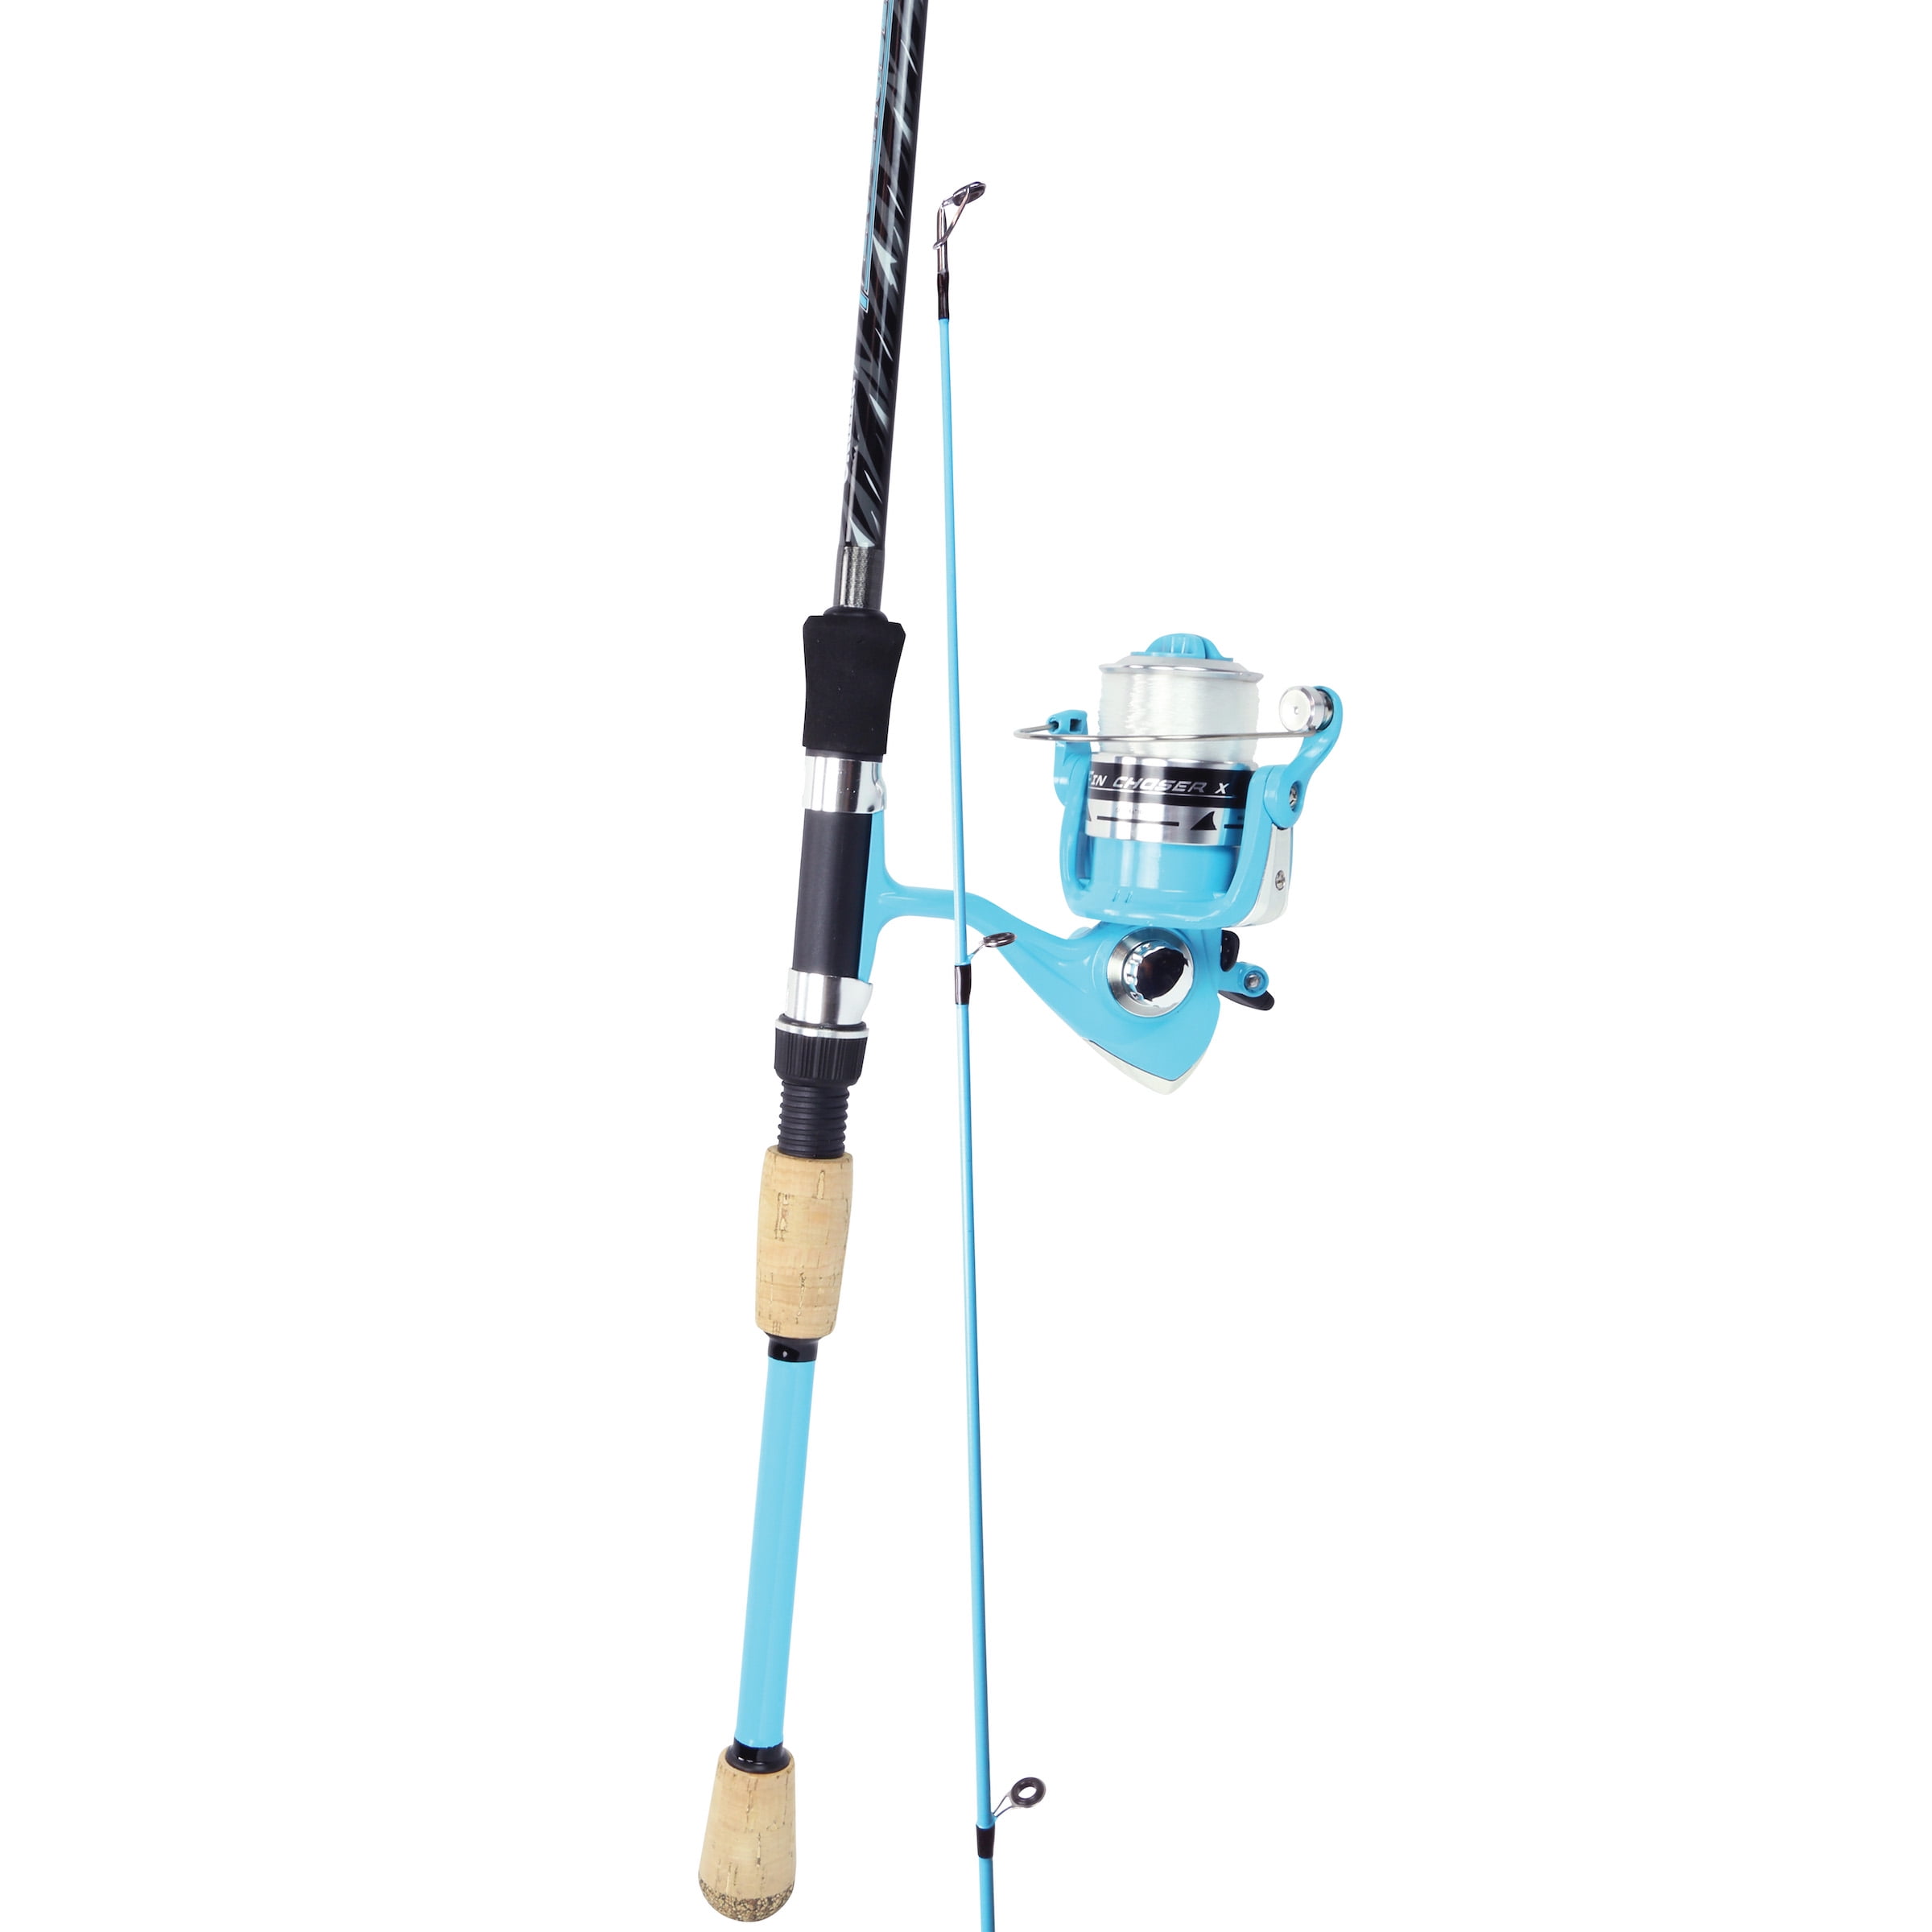 Youth Pink Fin Chaser X Series Spinning Combo by Okuma at Fleet Farm